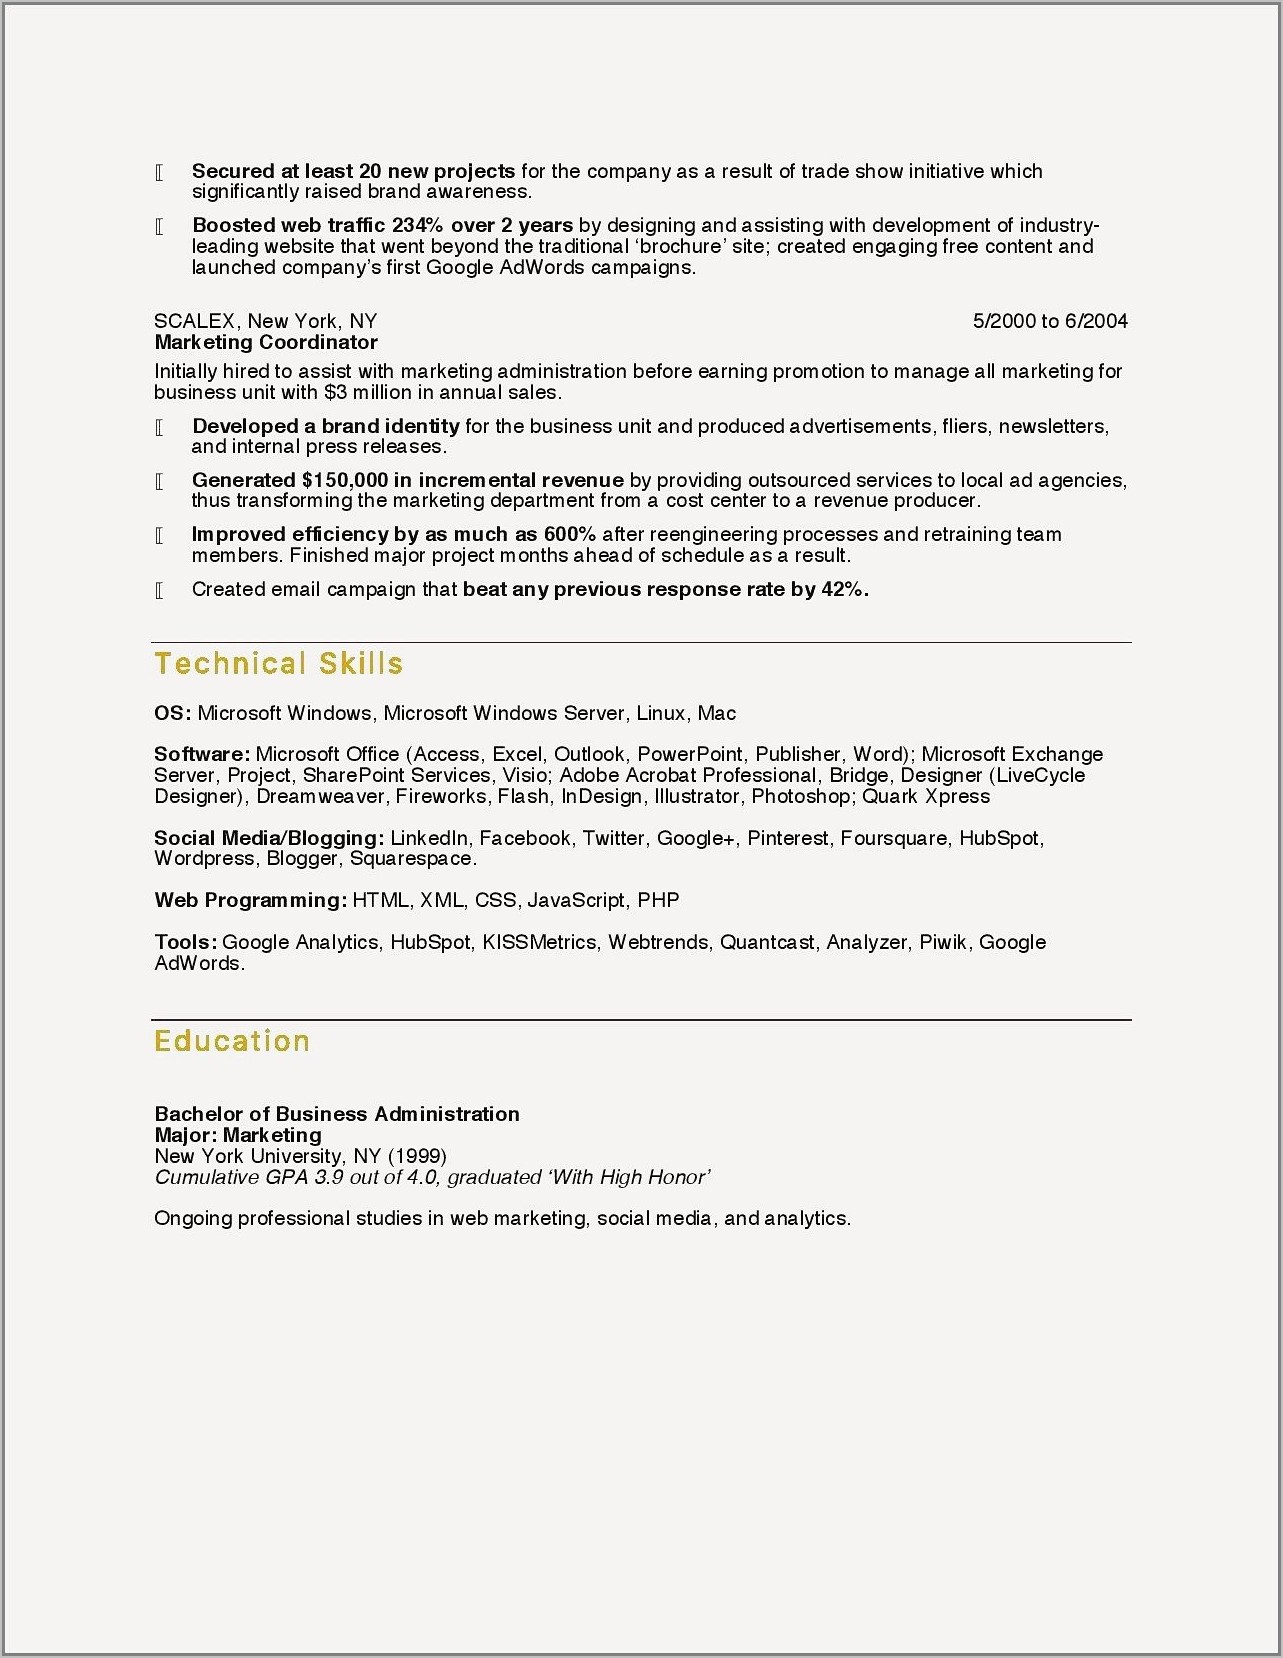 Resume Templates For Hr Professionals